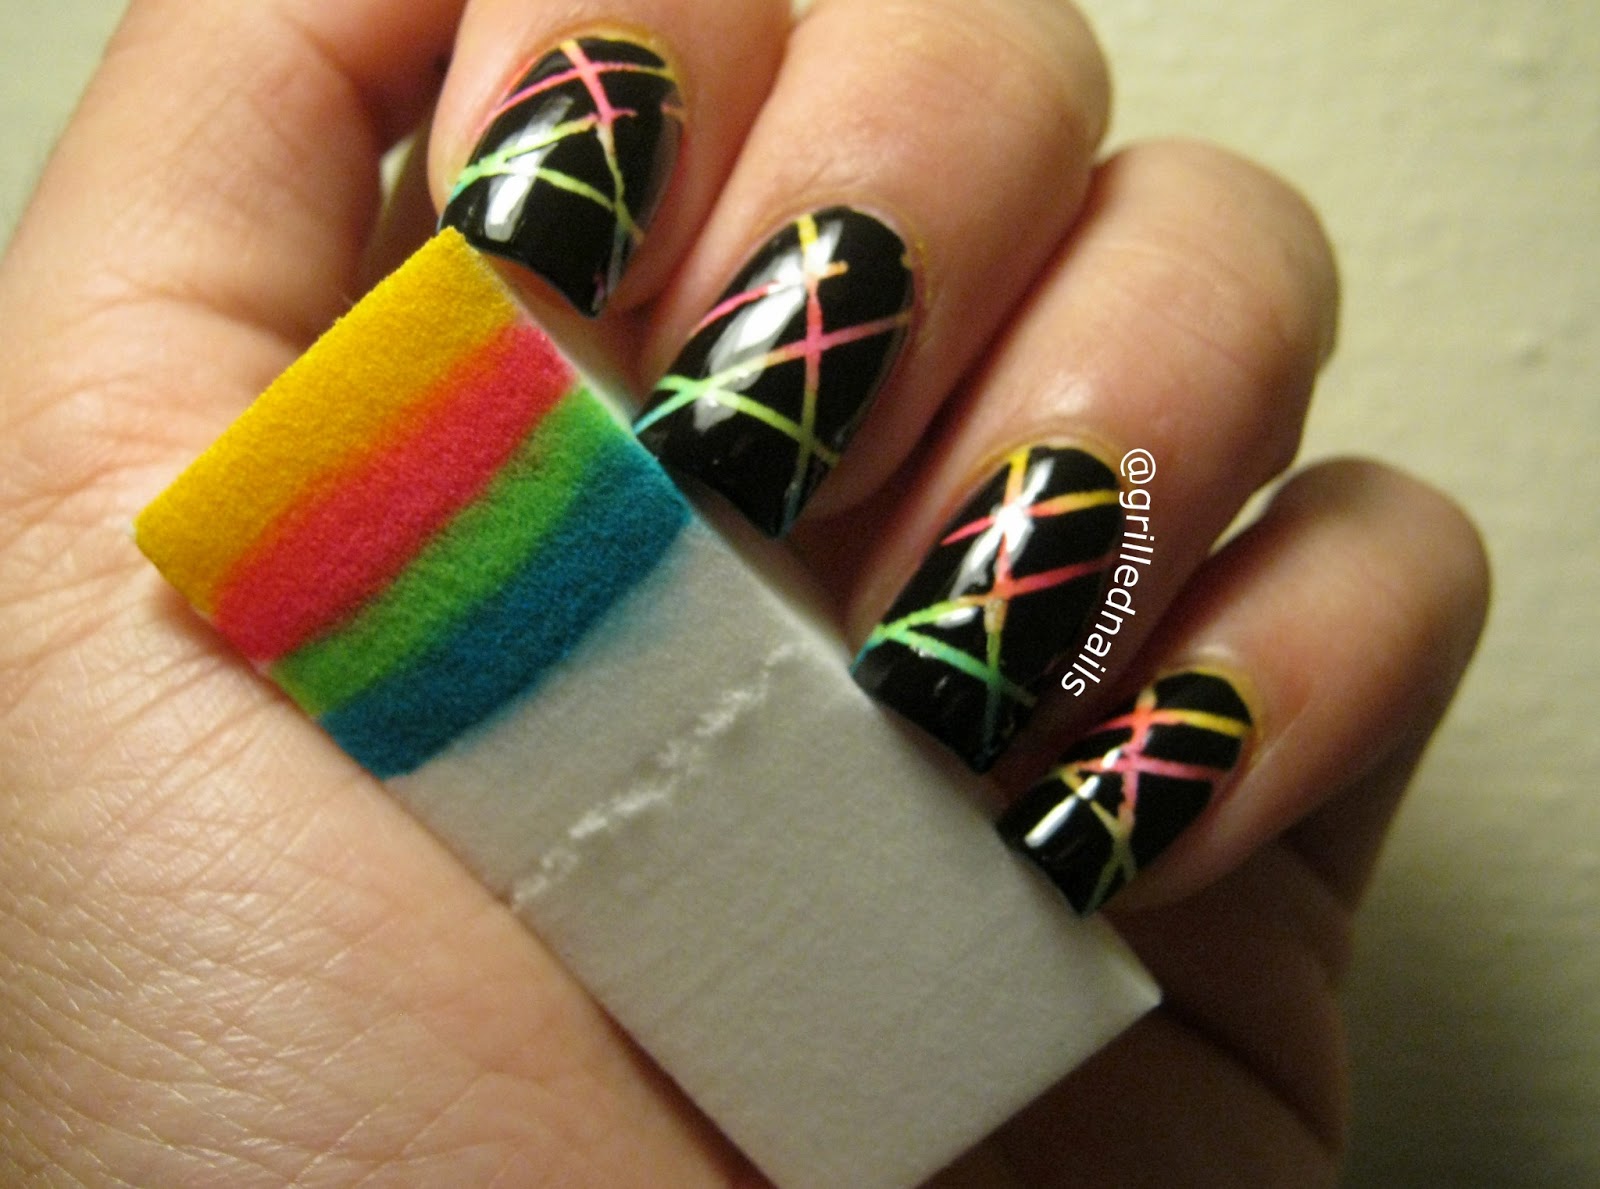 7. Surgical Tape Nail Art for Long Nails - wide 9